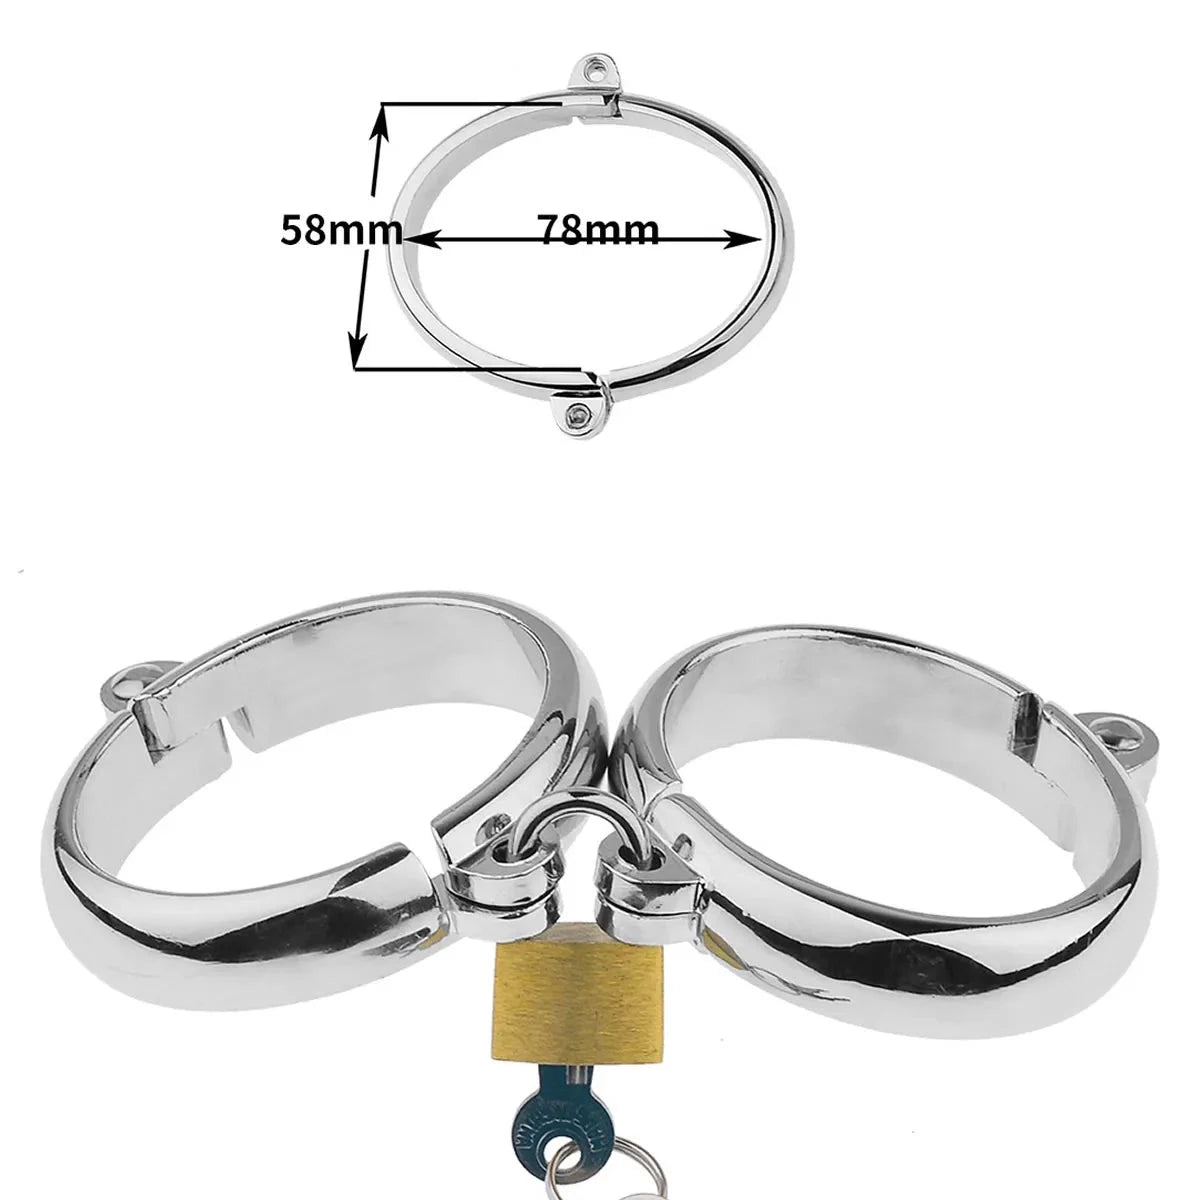 Stainless Steal Cuffs - Handcuffs - Twisted Jezebel